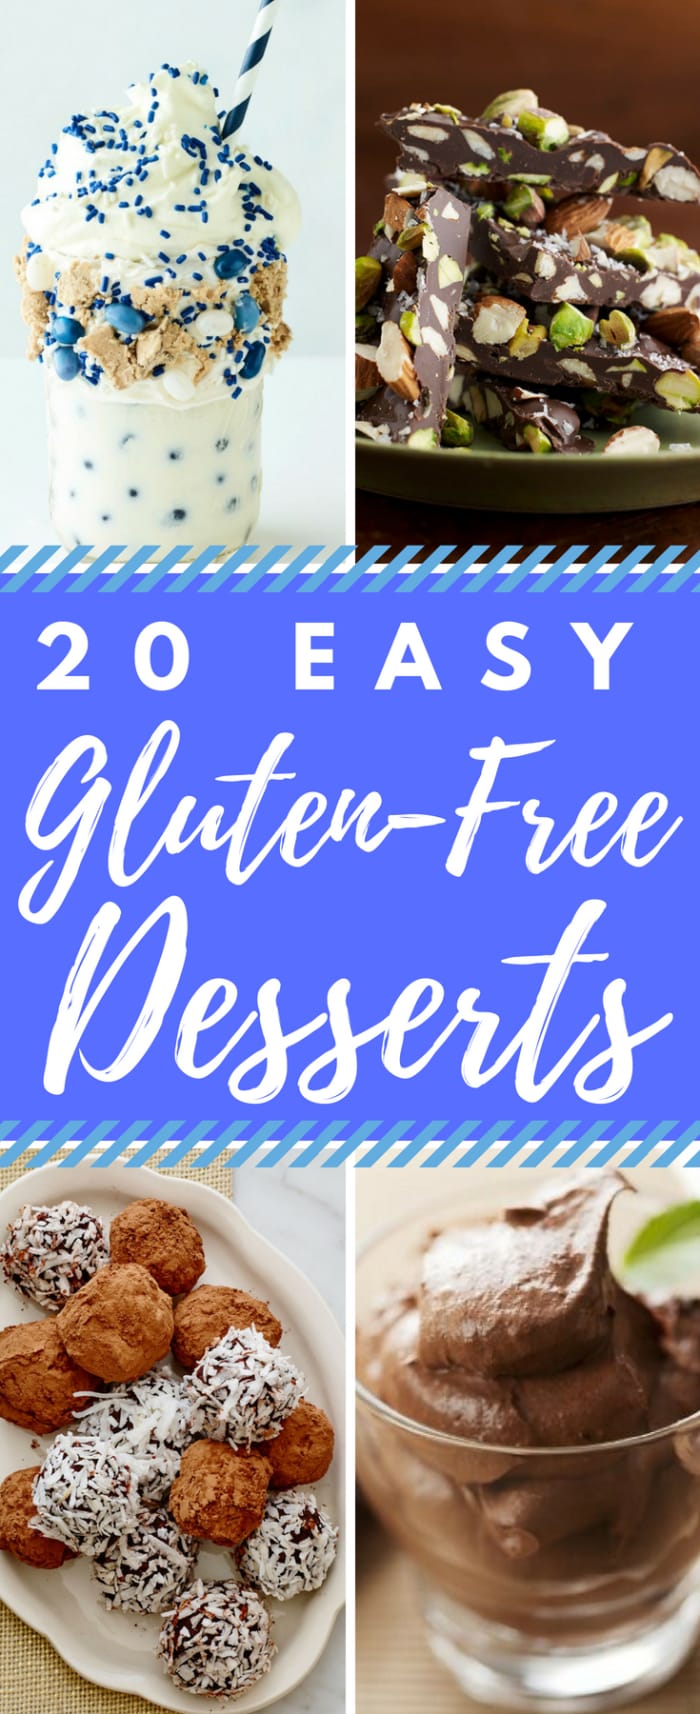 20 Gluten Free Desserts That Don't Need Special ...